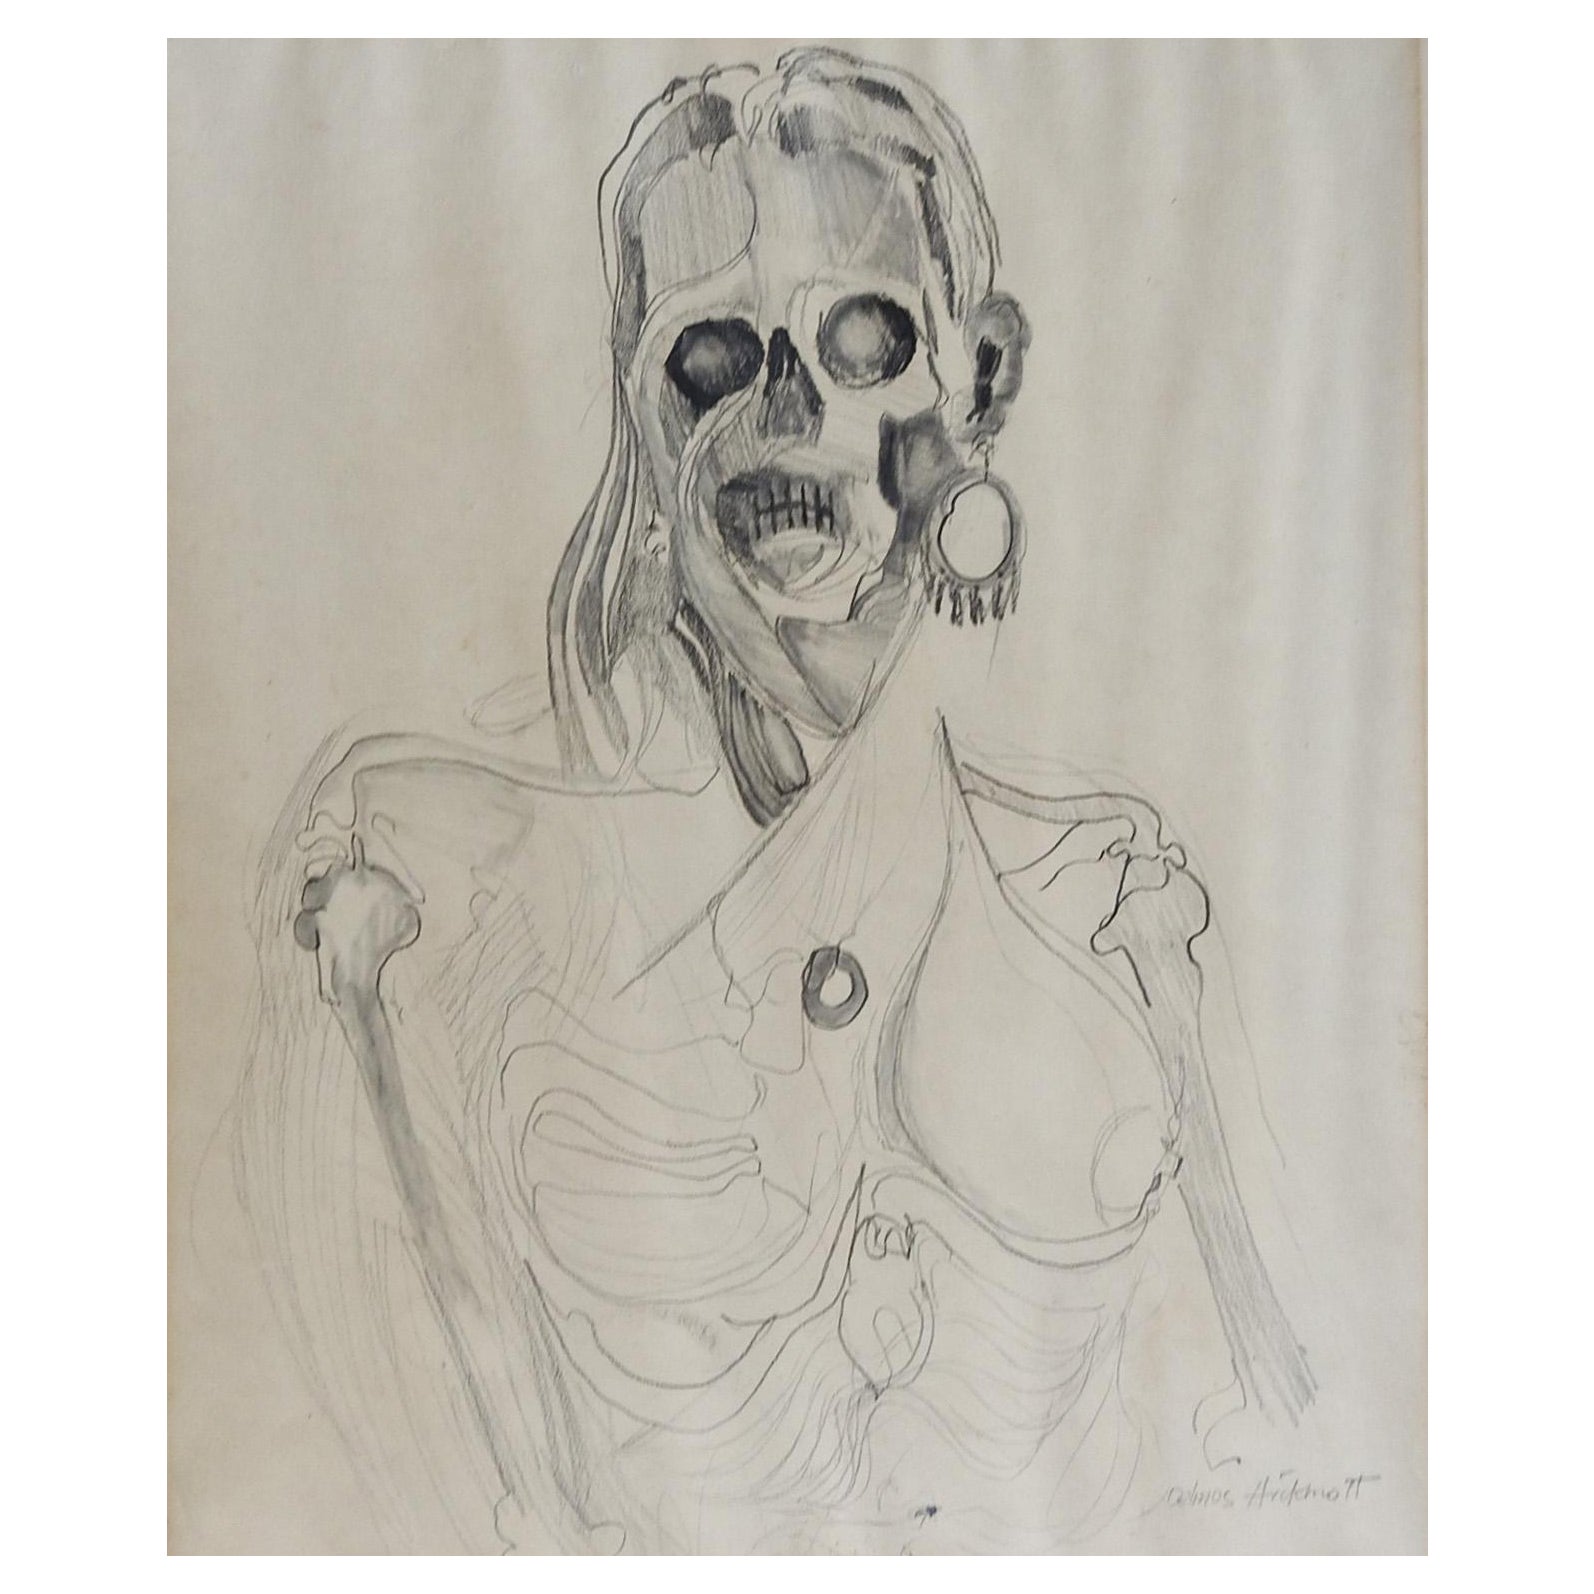 Abstract Illustration Zombie Science Fiction Original Pencil Drawing For Sale